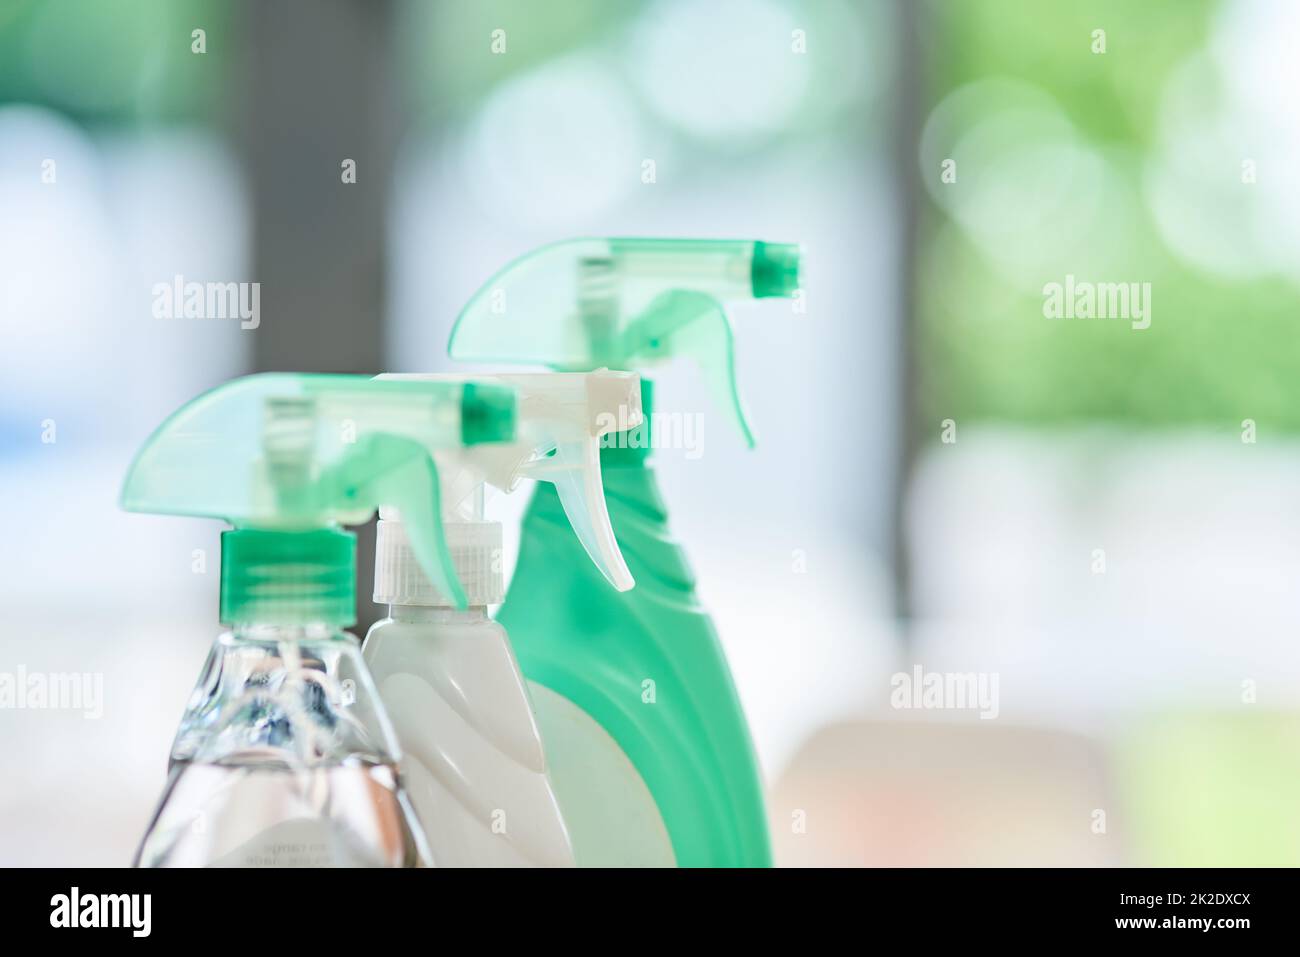 Lining up to do their chores. Shot of cleaning detergent at home with no people. Stock Photo